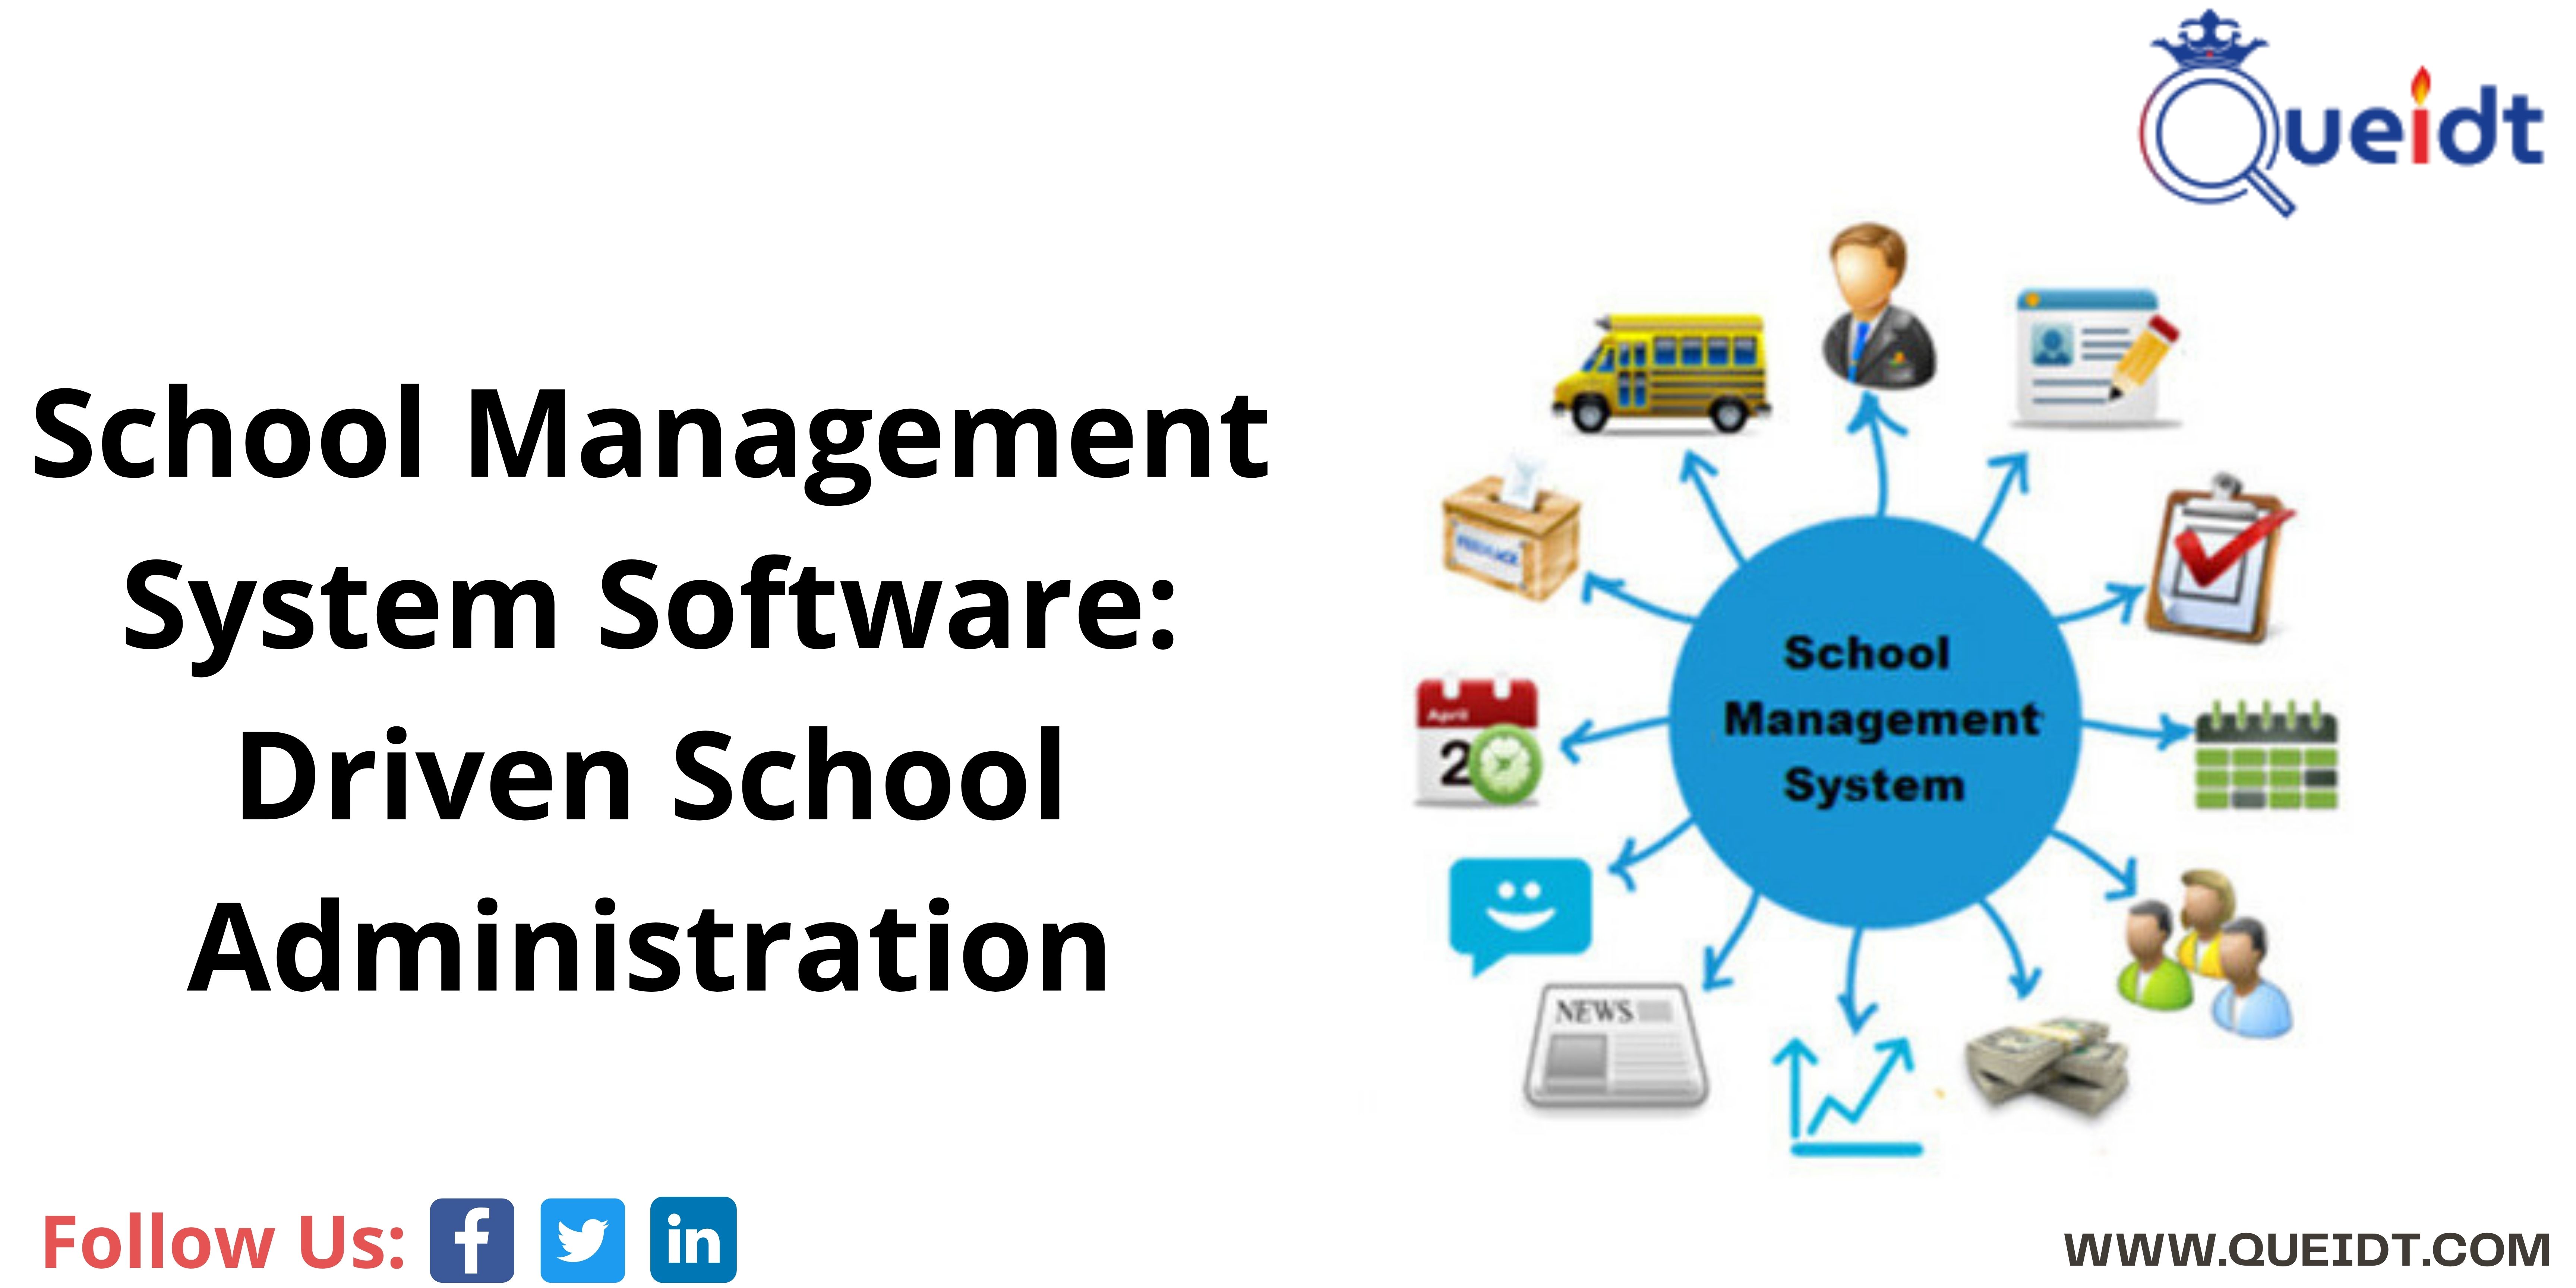 School Management System Software: Driven School Administration